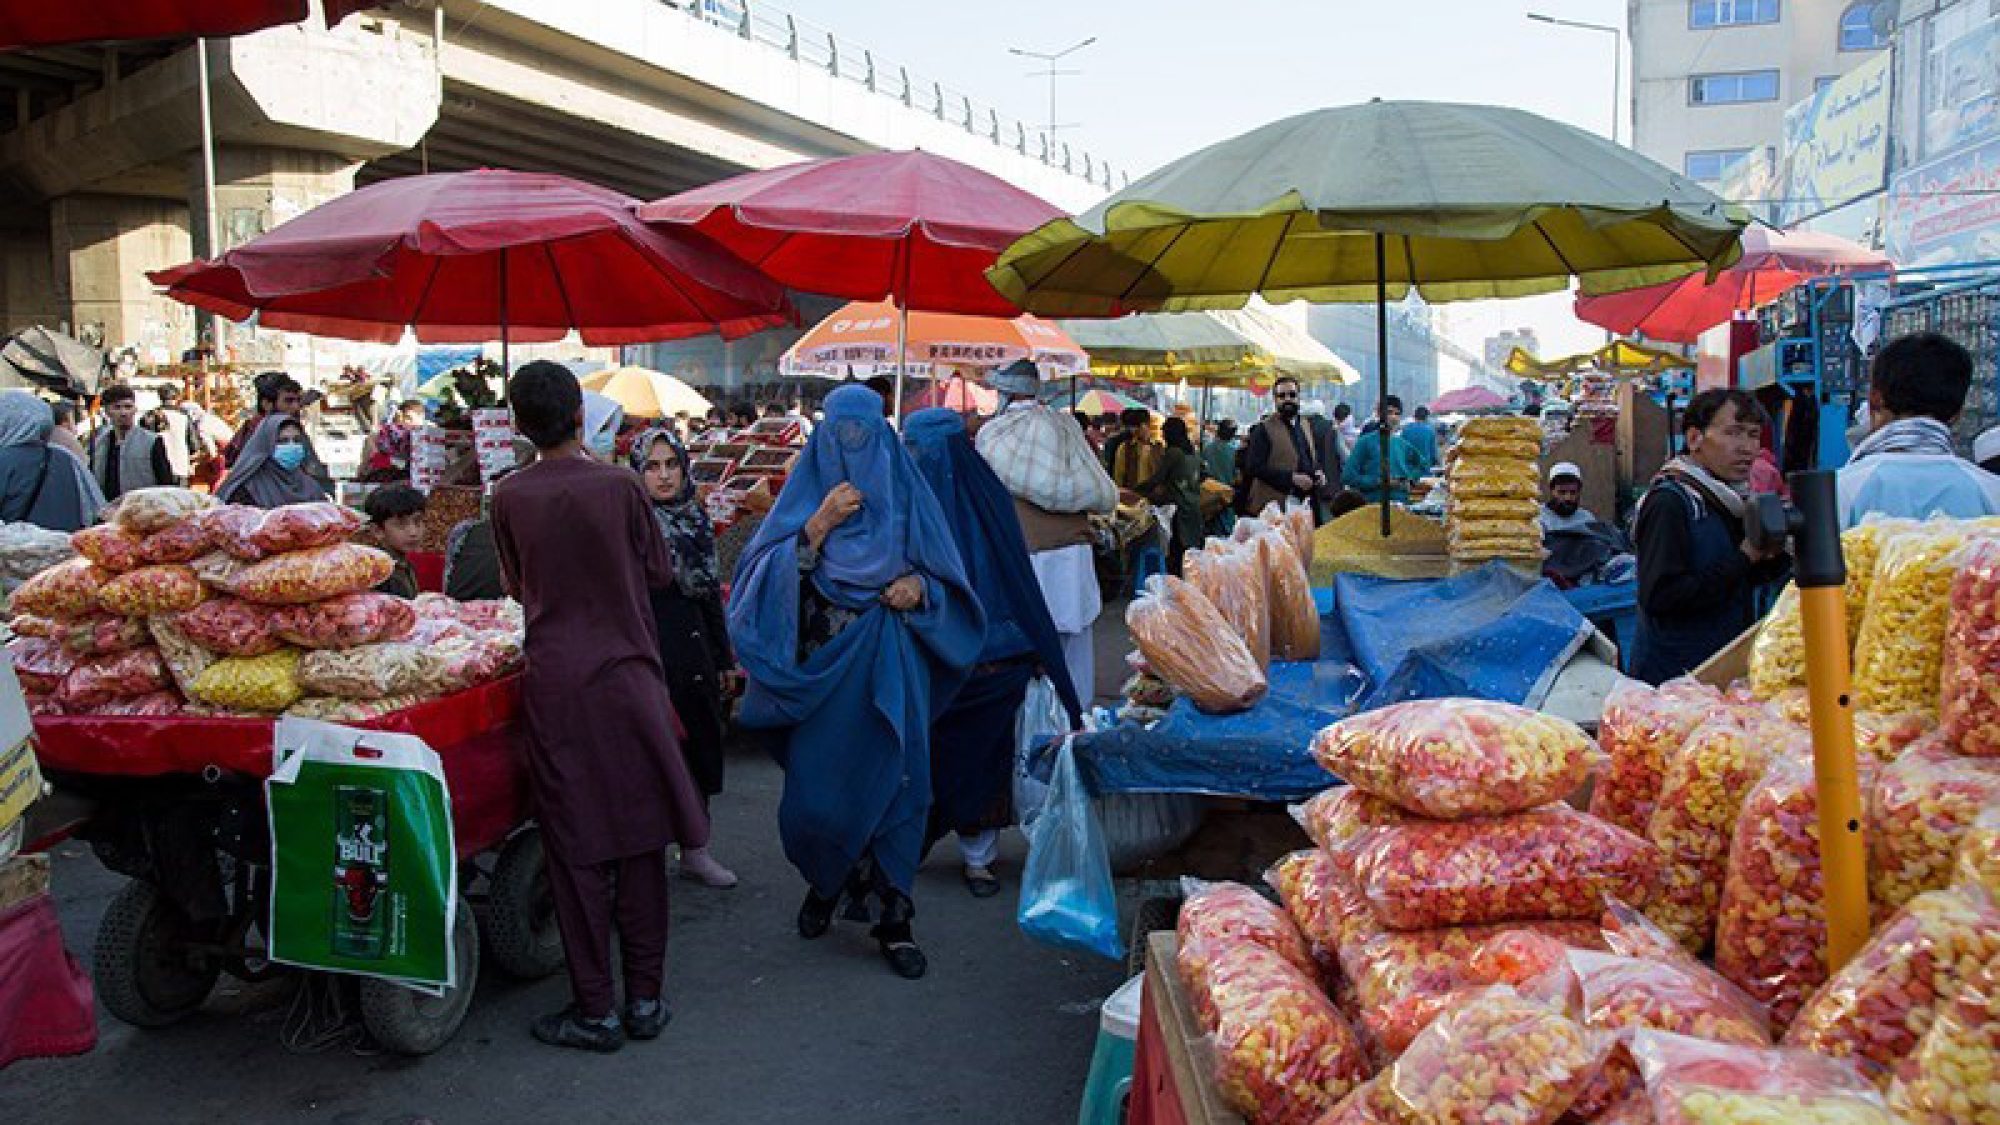 Street showing people and vendors in Kabul